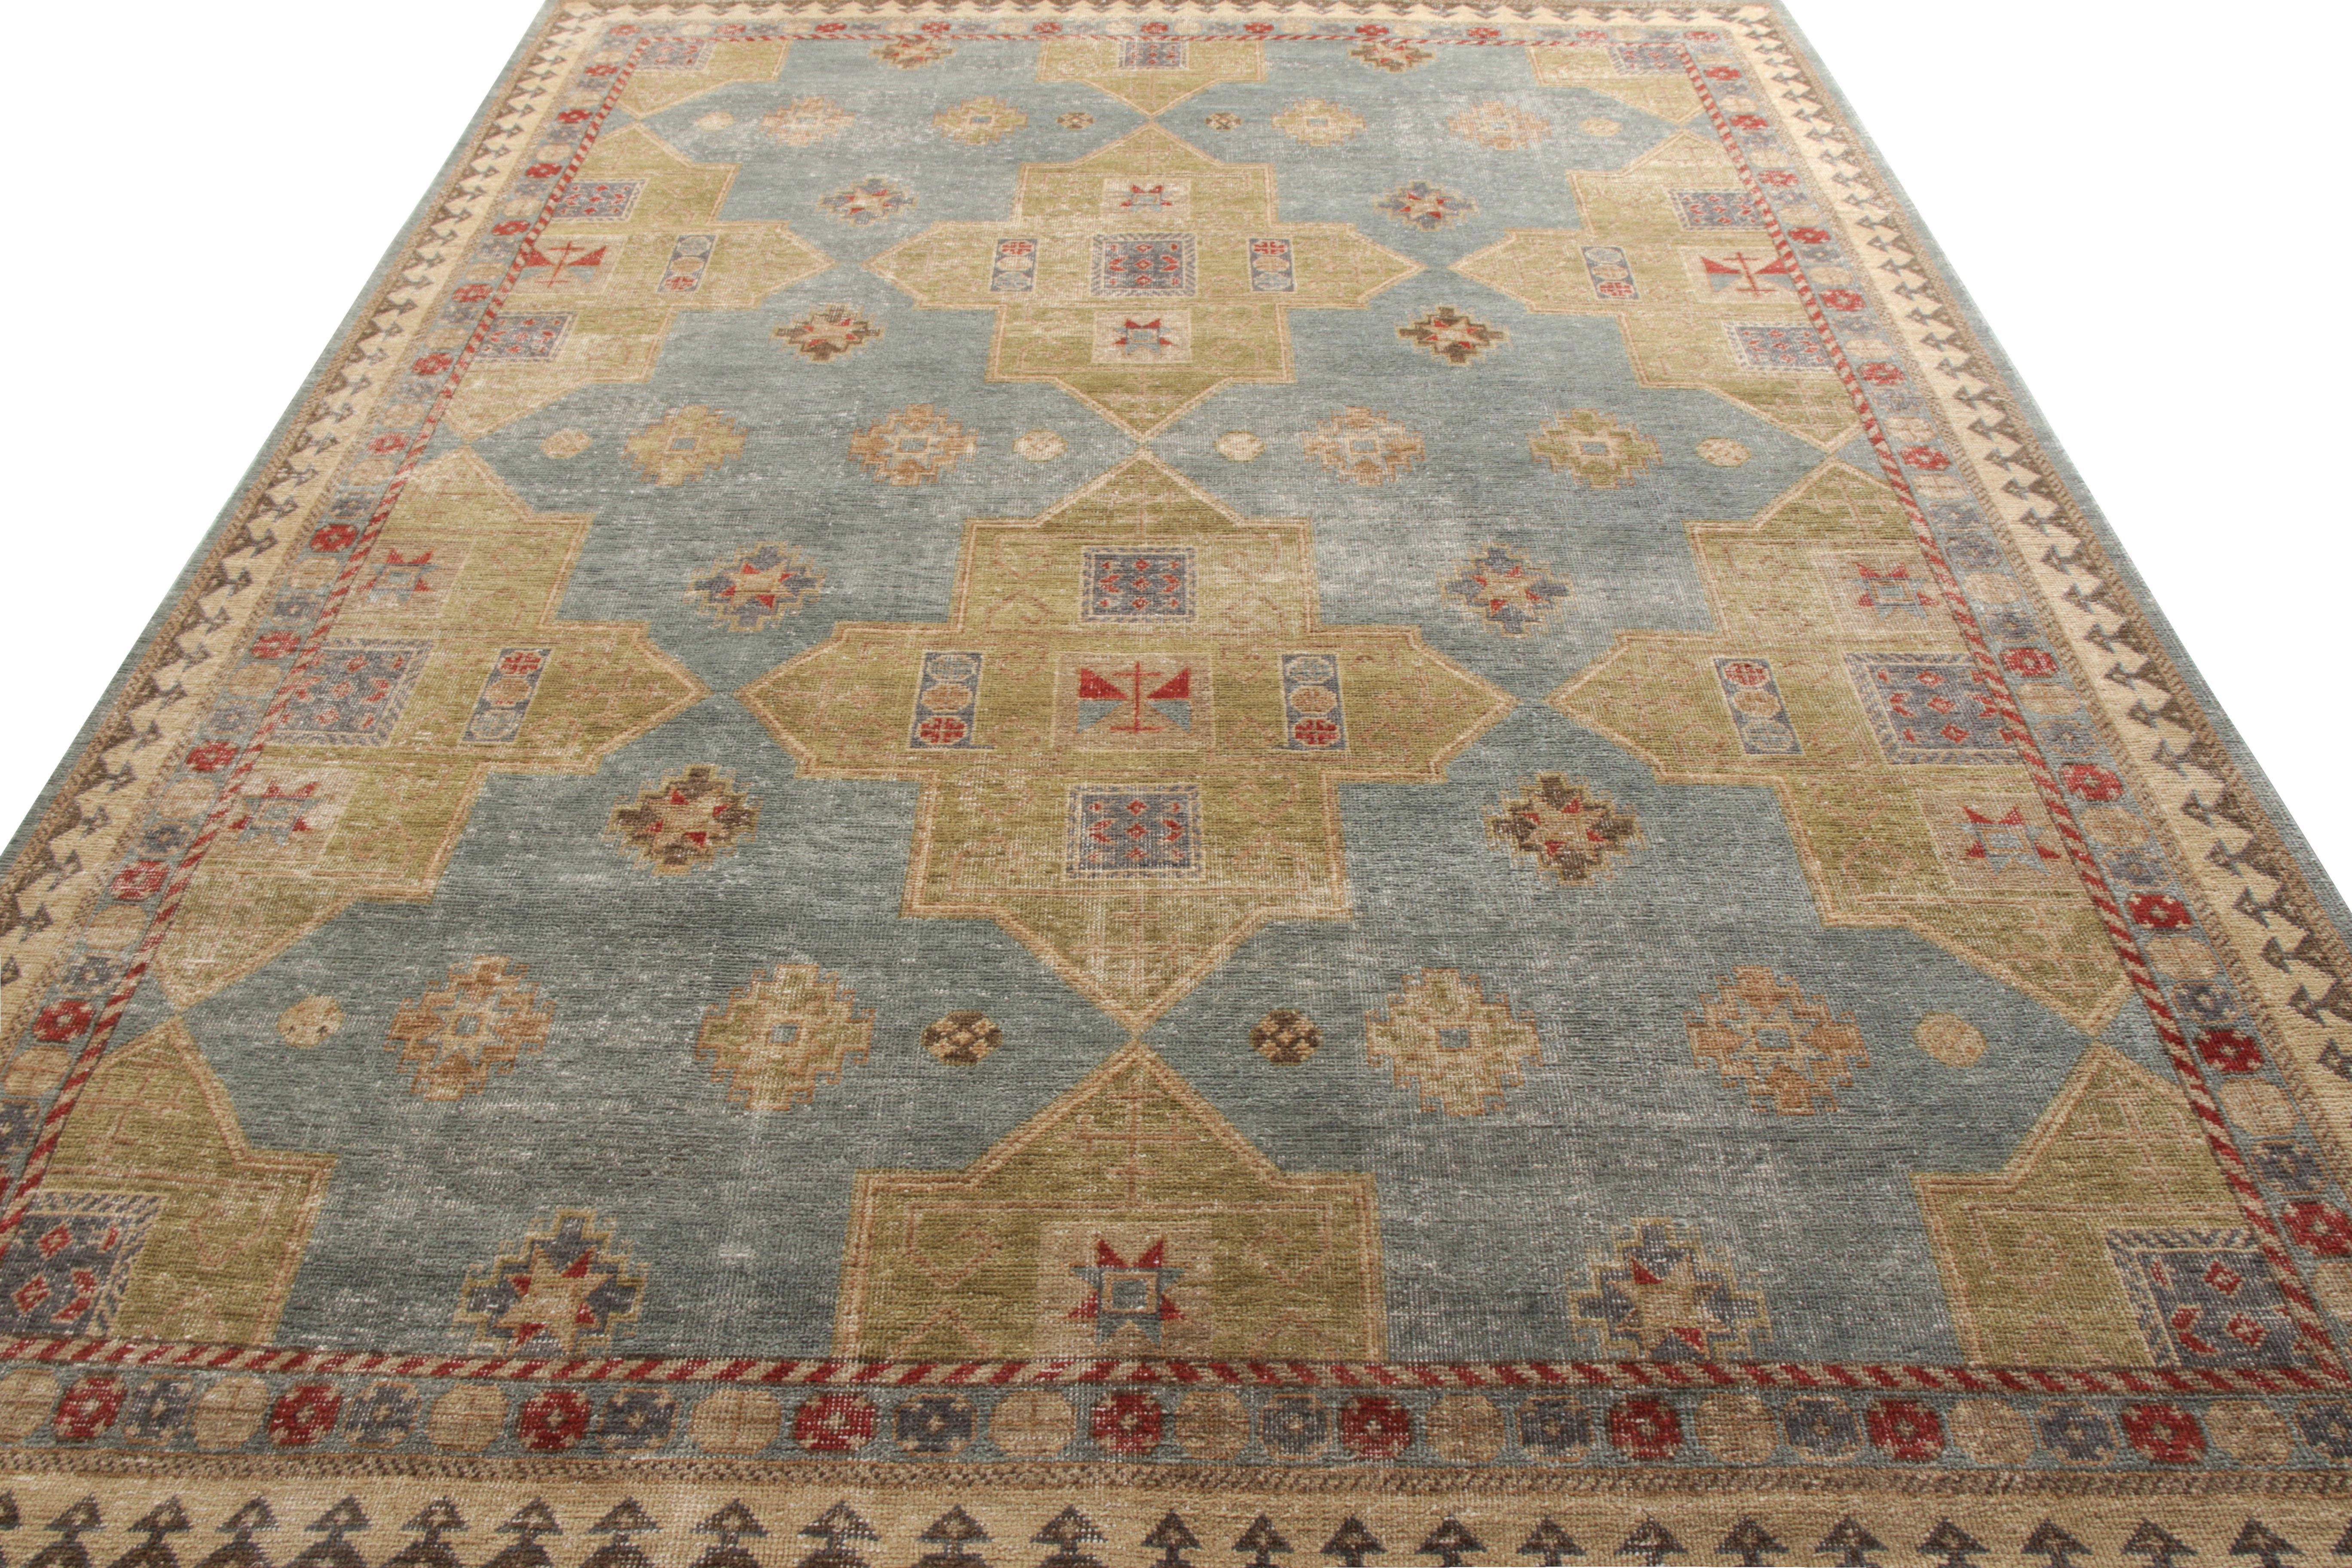 A scintillating 9 x 12 rendition of traditional style by Rug & Kilim entering its prestigious Homage collection. Hand knotted in wool, the open field enjoys a unique take on Caucasian rug aesthetics in an uncommon green and blue, accented by beige